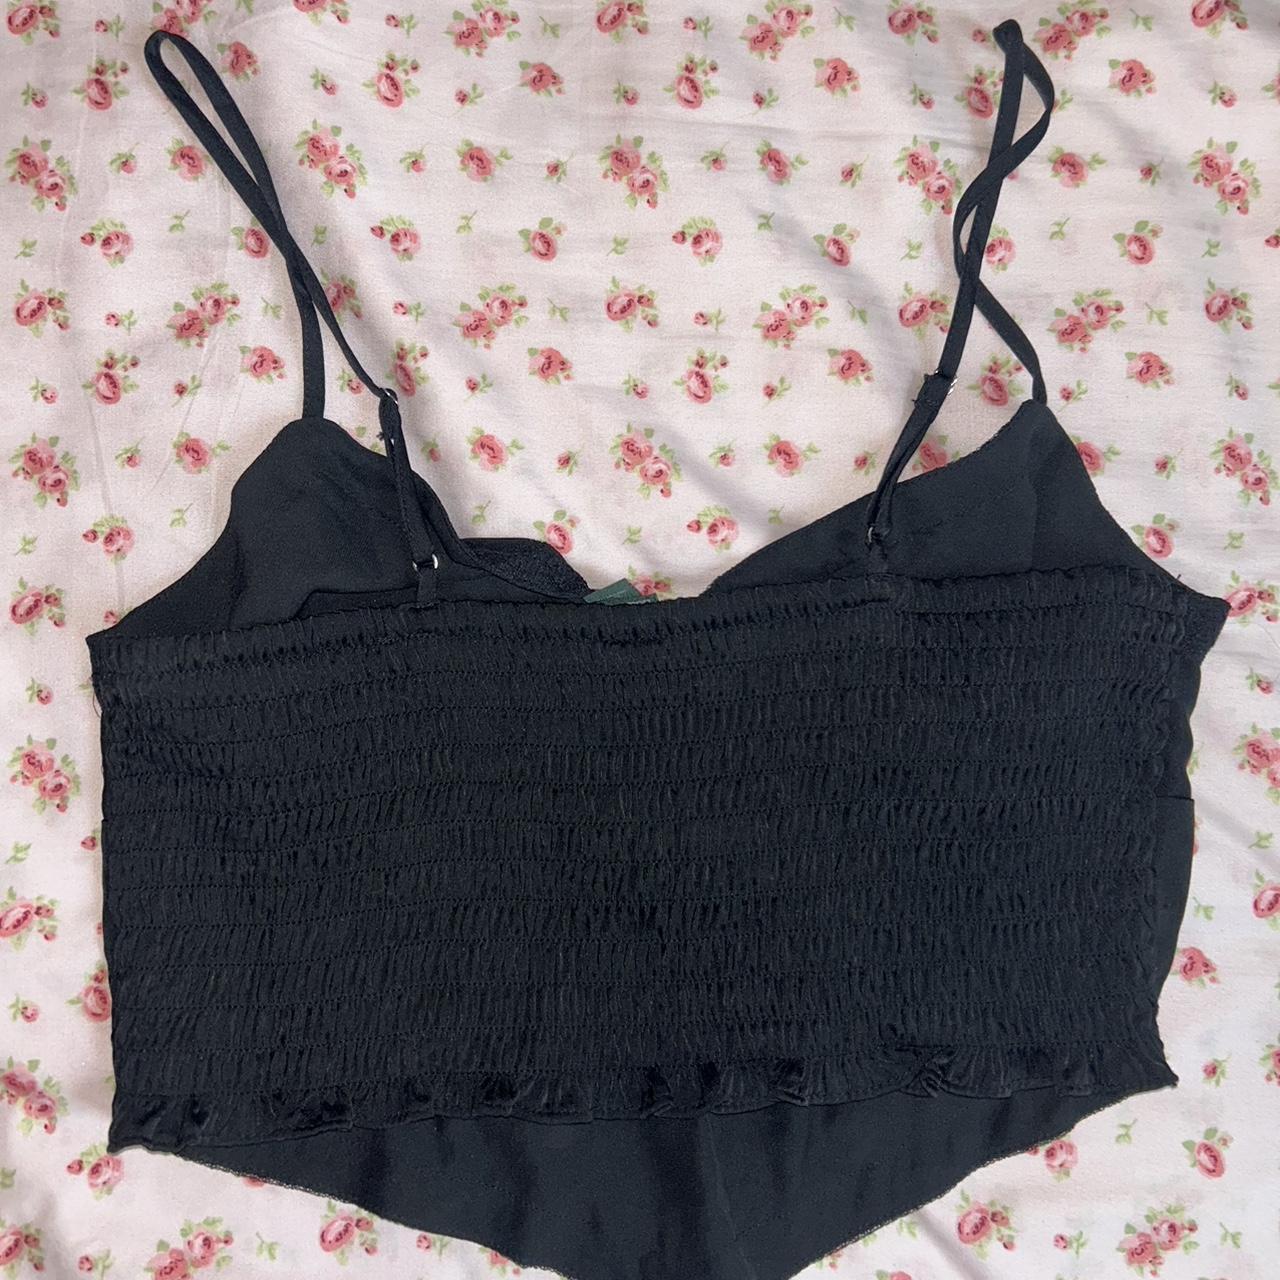 Black little top!🖤🪩 cute lace trimming with... - Depop